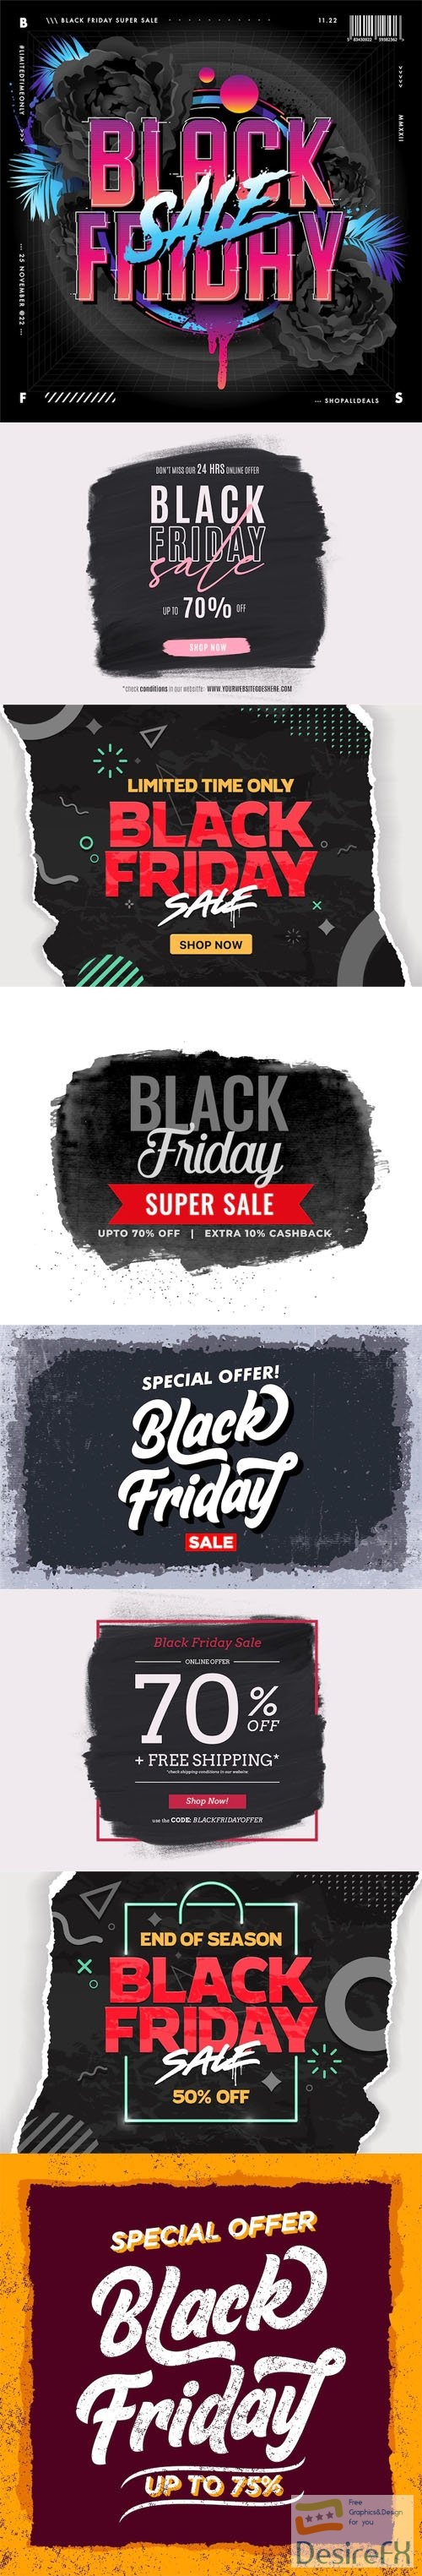 Black Friday - 10 Creative Banners & Backgrounds Vector Templates